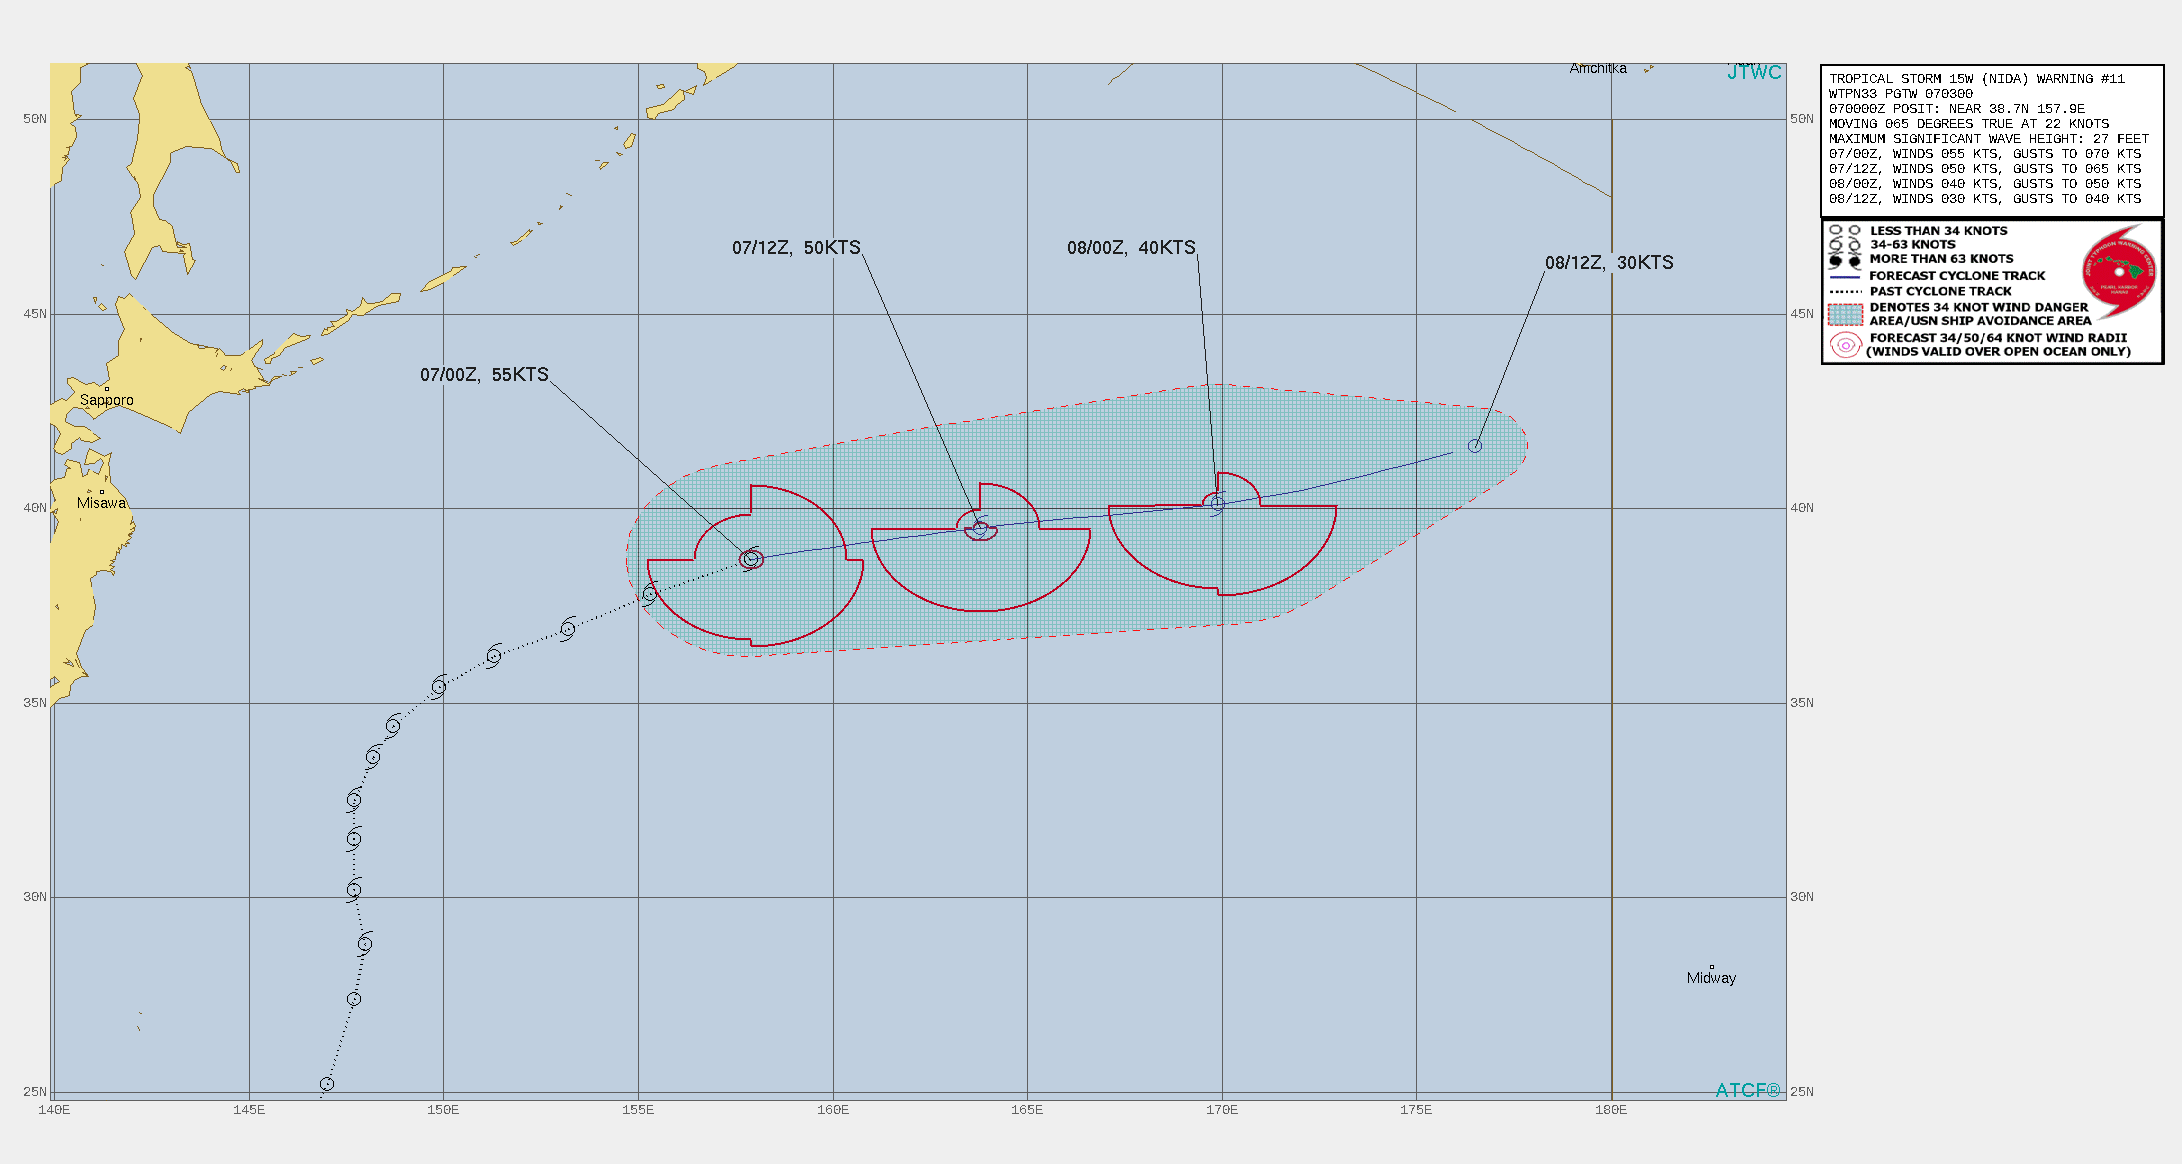 TS 15W(NIDA). WARNING 11 ISSUED AT 07/03UTC.THERE ARE NO SIGNIFICANT CHANGES TO THE FORECAST FROM THE PREVIOUS WARNING.  FORECAST DISCUSSION: TROPICAL STORM 15W (NIDA) HAS ACCELERATED EAST- NORTHEASTWARD OVER THE PAST 6 HOURS ALONG THE NORTHERN PERIPHERY OF  THE DEEP SUBTROPICAL RIDGE LOCATED TO THE SOUTH. TS 15W IS EXPECTED TO MAINTAIN  THIS GENERAL TRACK THROUGHOUT THE FORECAST PERIOD. VERTICAL WIND SHEAR IS FORECAST  TO STEADILY INCREASE AS THE SYSTEM APPROACHES THE BAROCLINIC ZONE BY  24H. TS 15W HAS ALREADY MOVED NORTH OF THE 26C ISOTHERM AND  INTERACTION WITH THE COOLER WATERS WILL ASSIST IN INITIATING  EXTRATROPICAL TRANSITION.